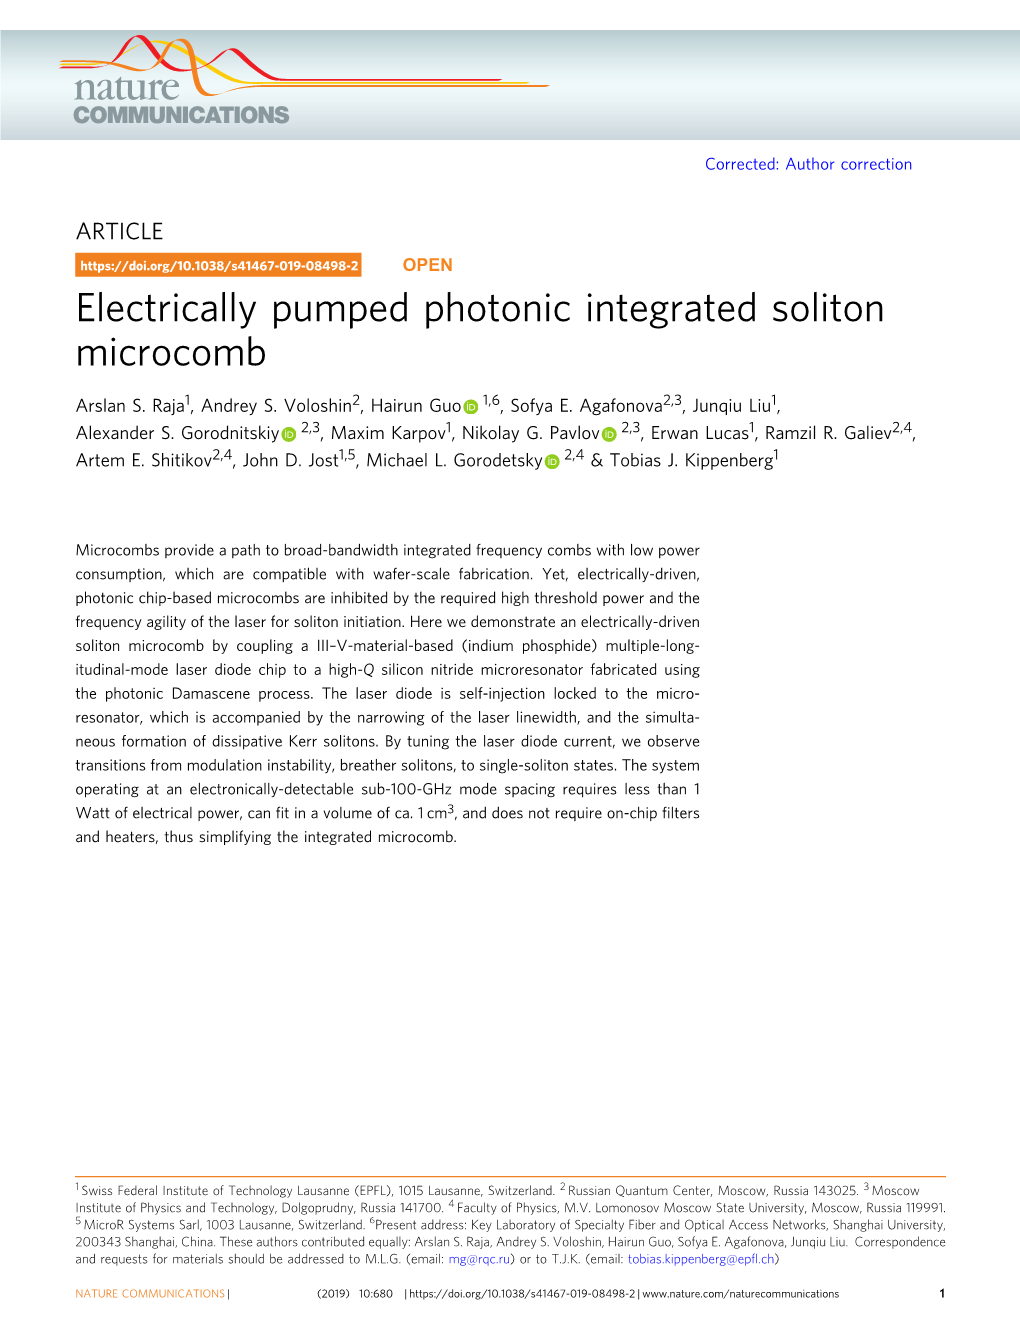 Electrically Pumped Photonic Integrated Soliton Microcomb